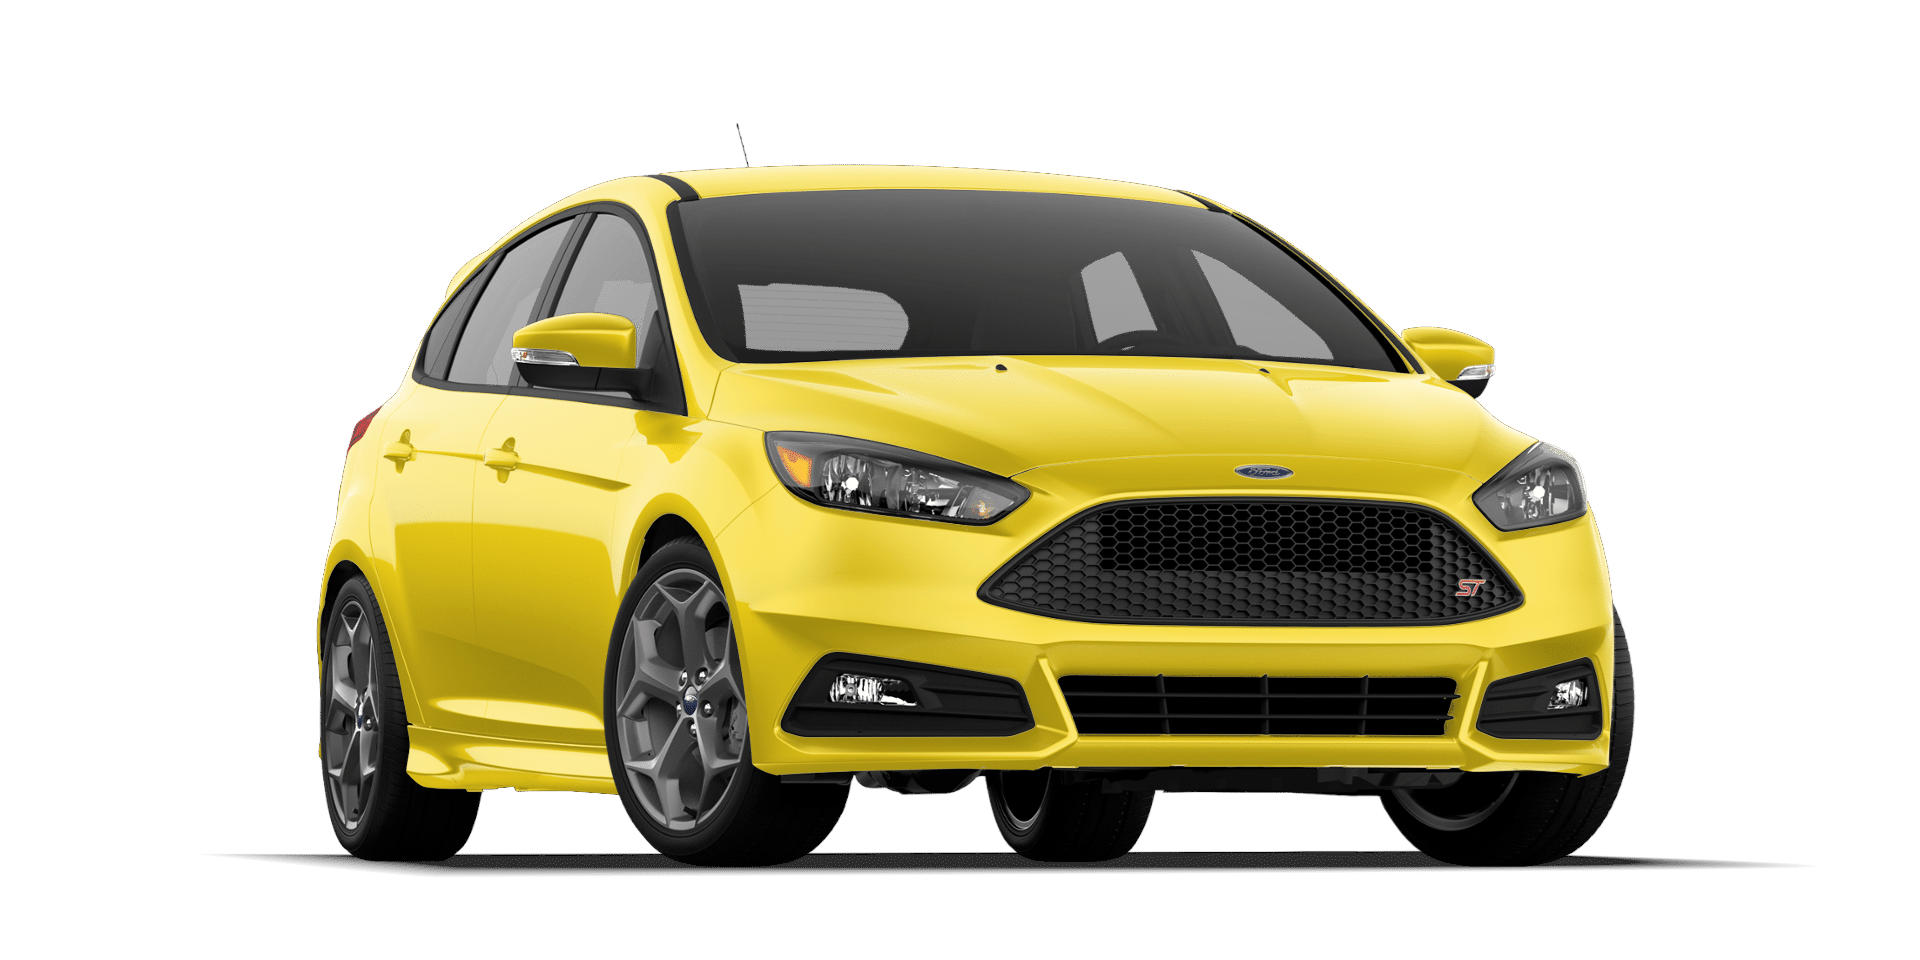 2018 Ford Focus ST Hatchback Full Specs, Features and Price | CarBuzz